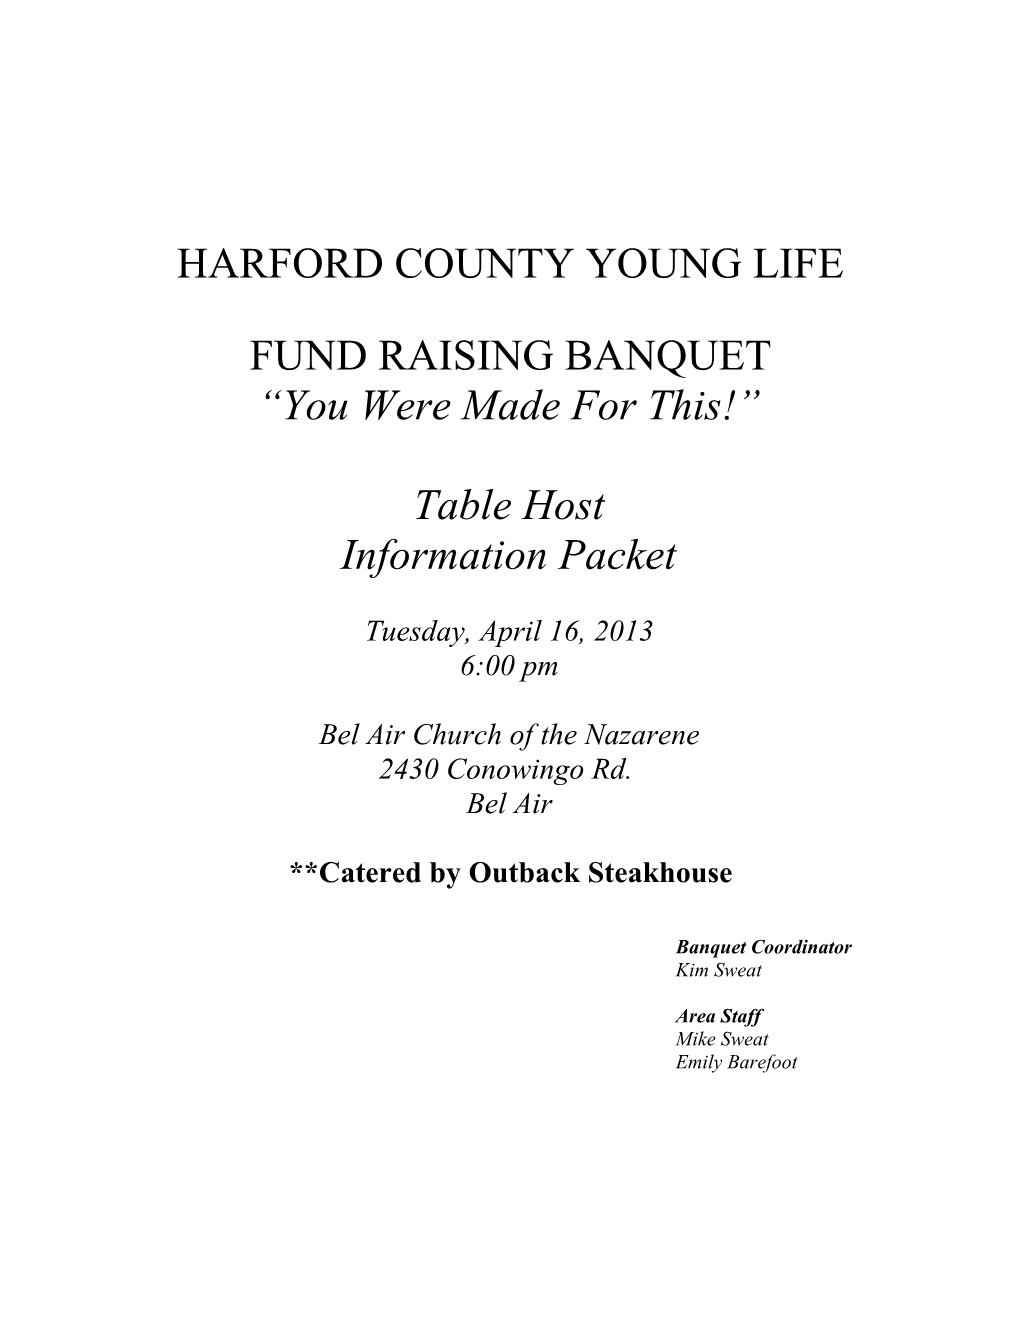 Harford County Young Life